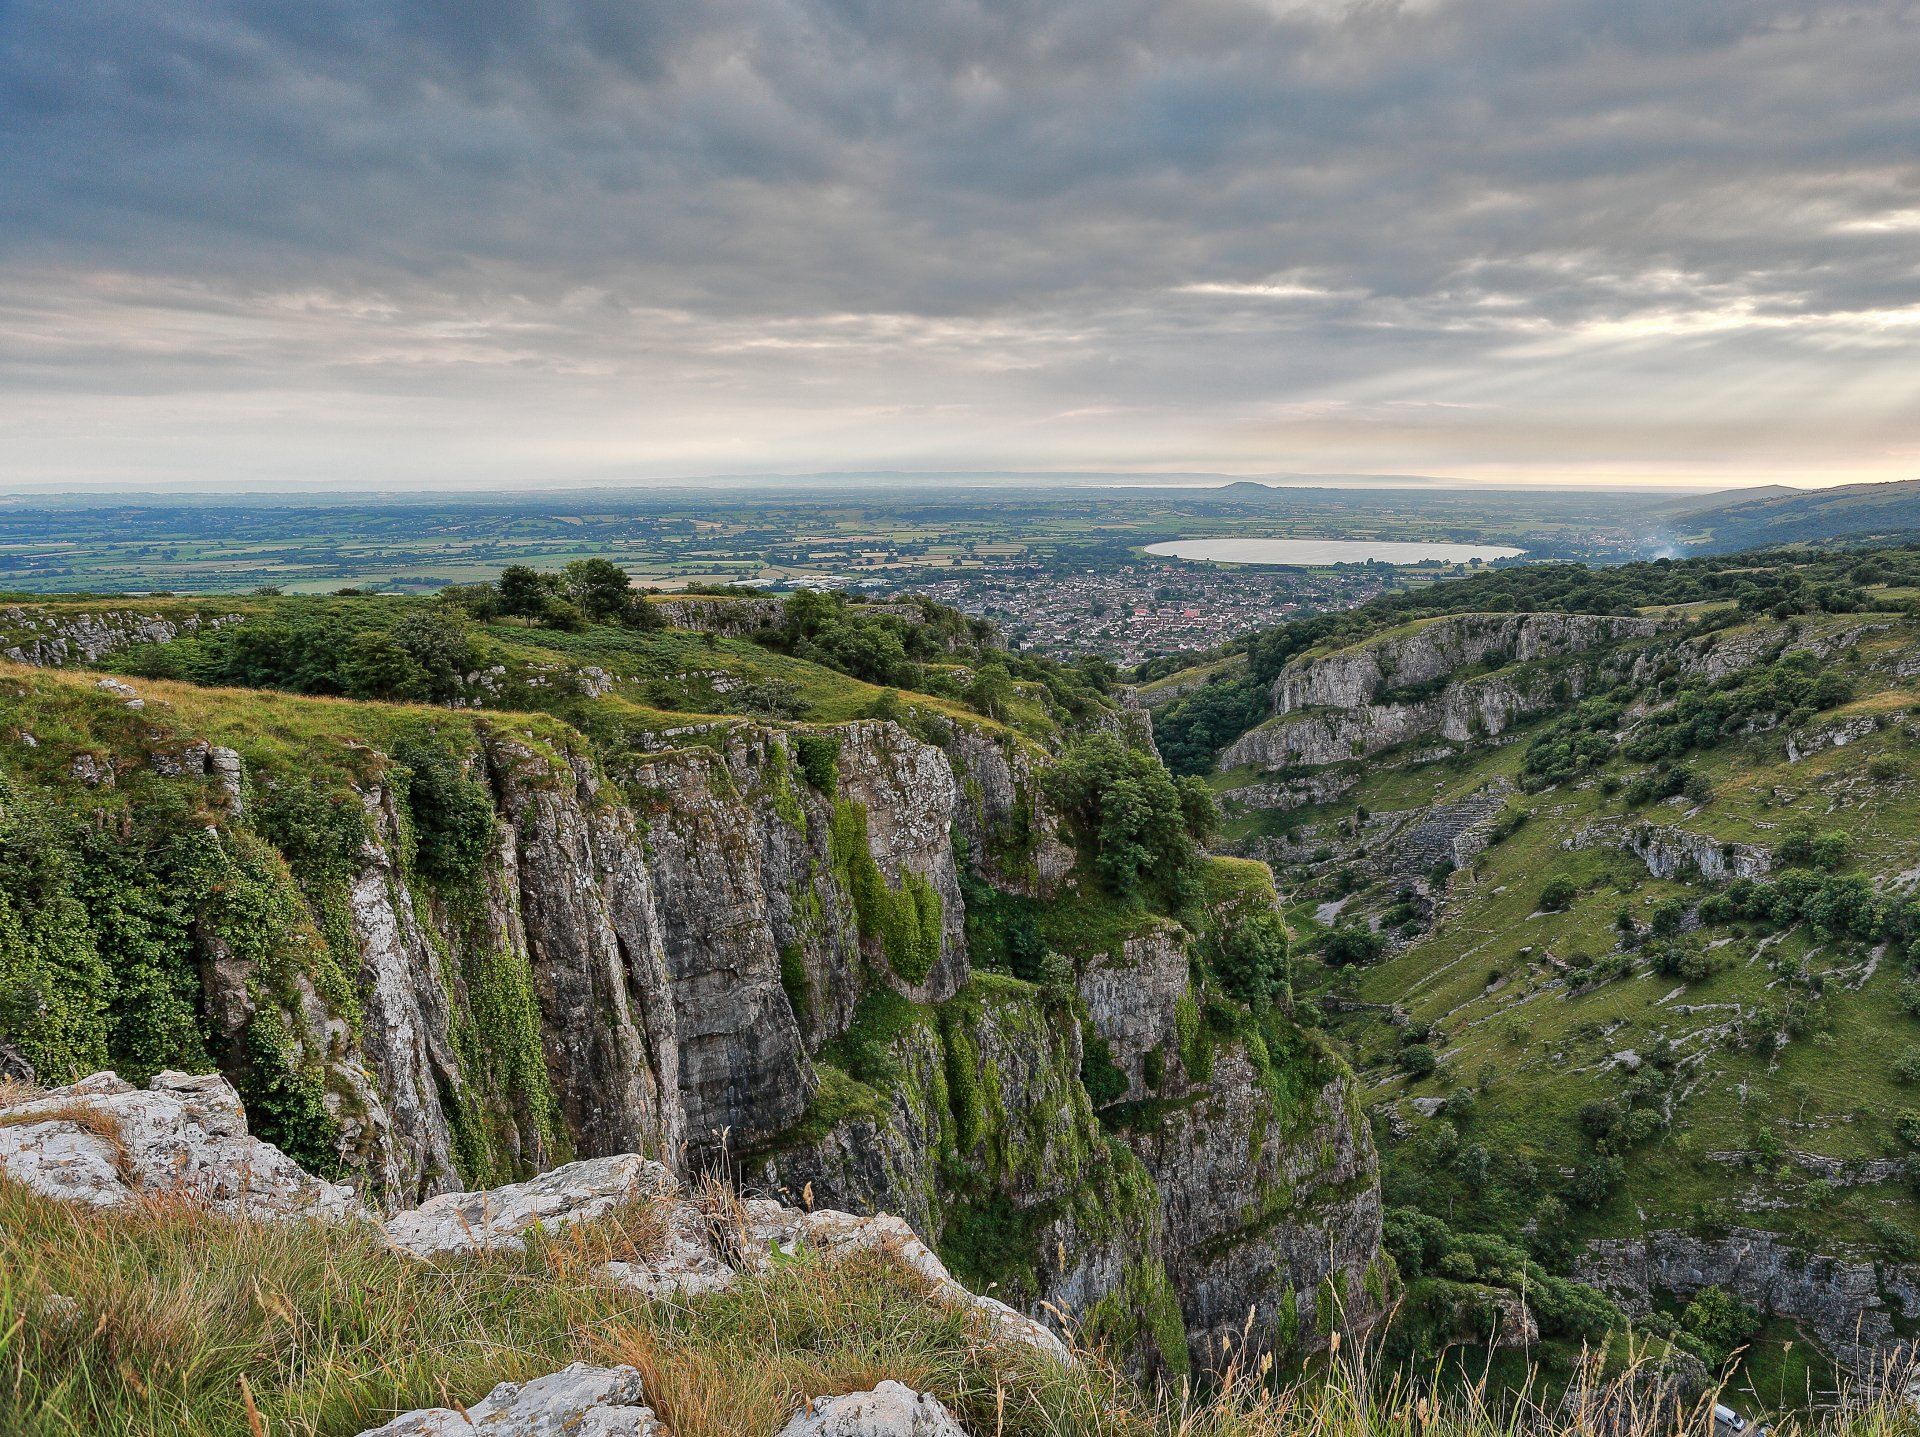 Cheddar Gorge and Caves, close to our campsite, Rodney Stoke